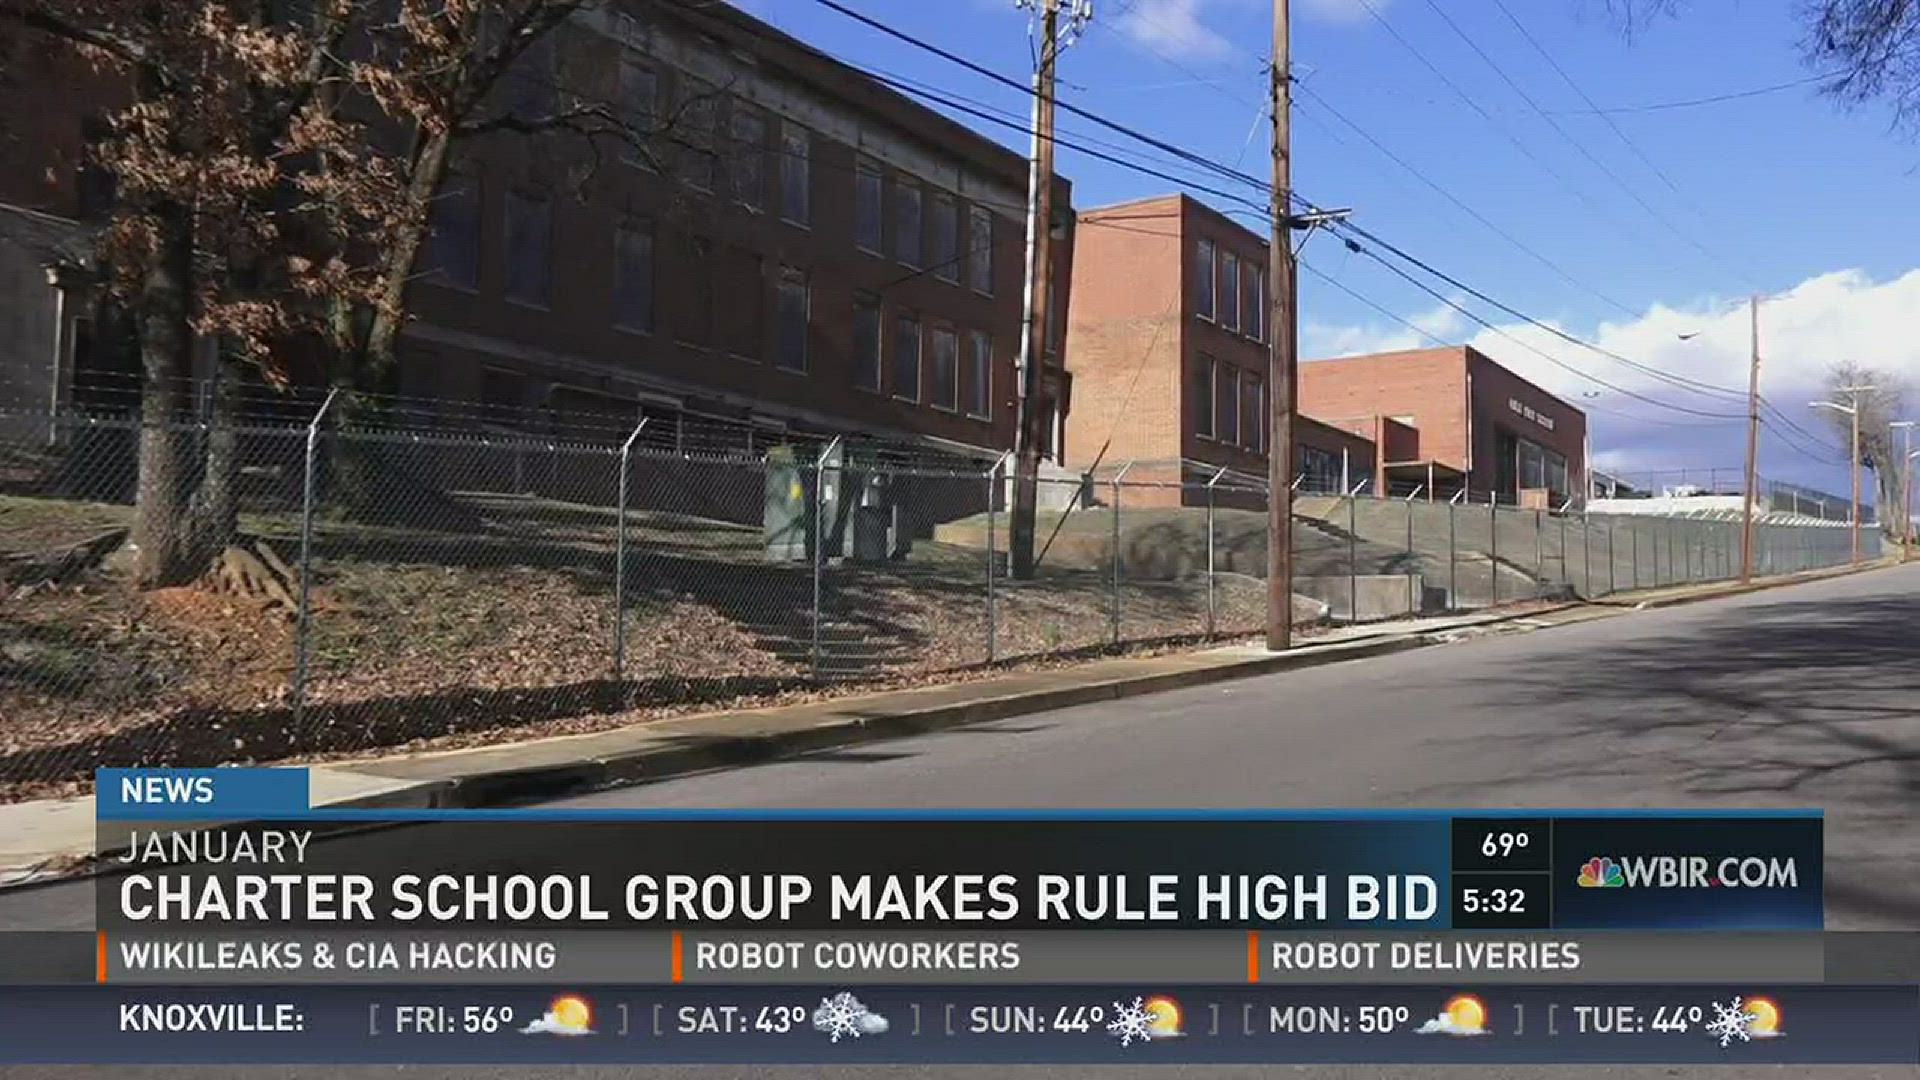 March 9, 2017: A group with charter school credentials wants to redevelop Knoxville's Rule High School.